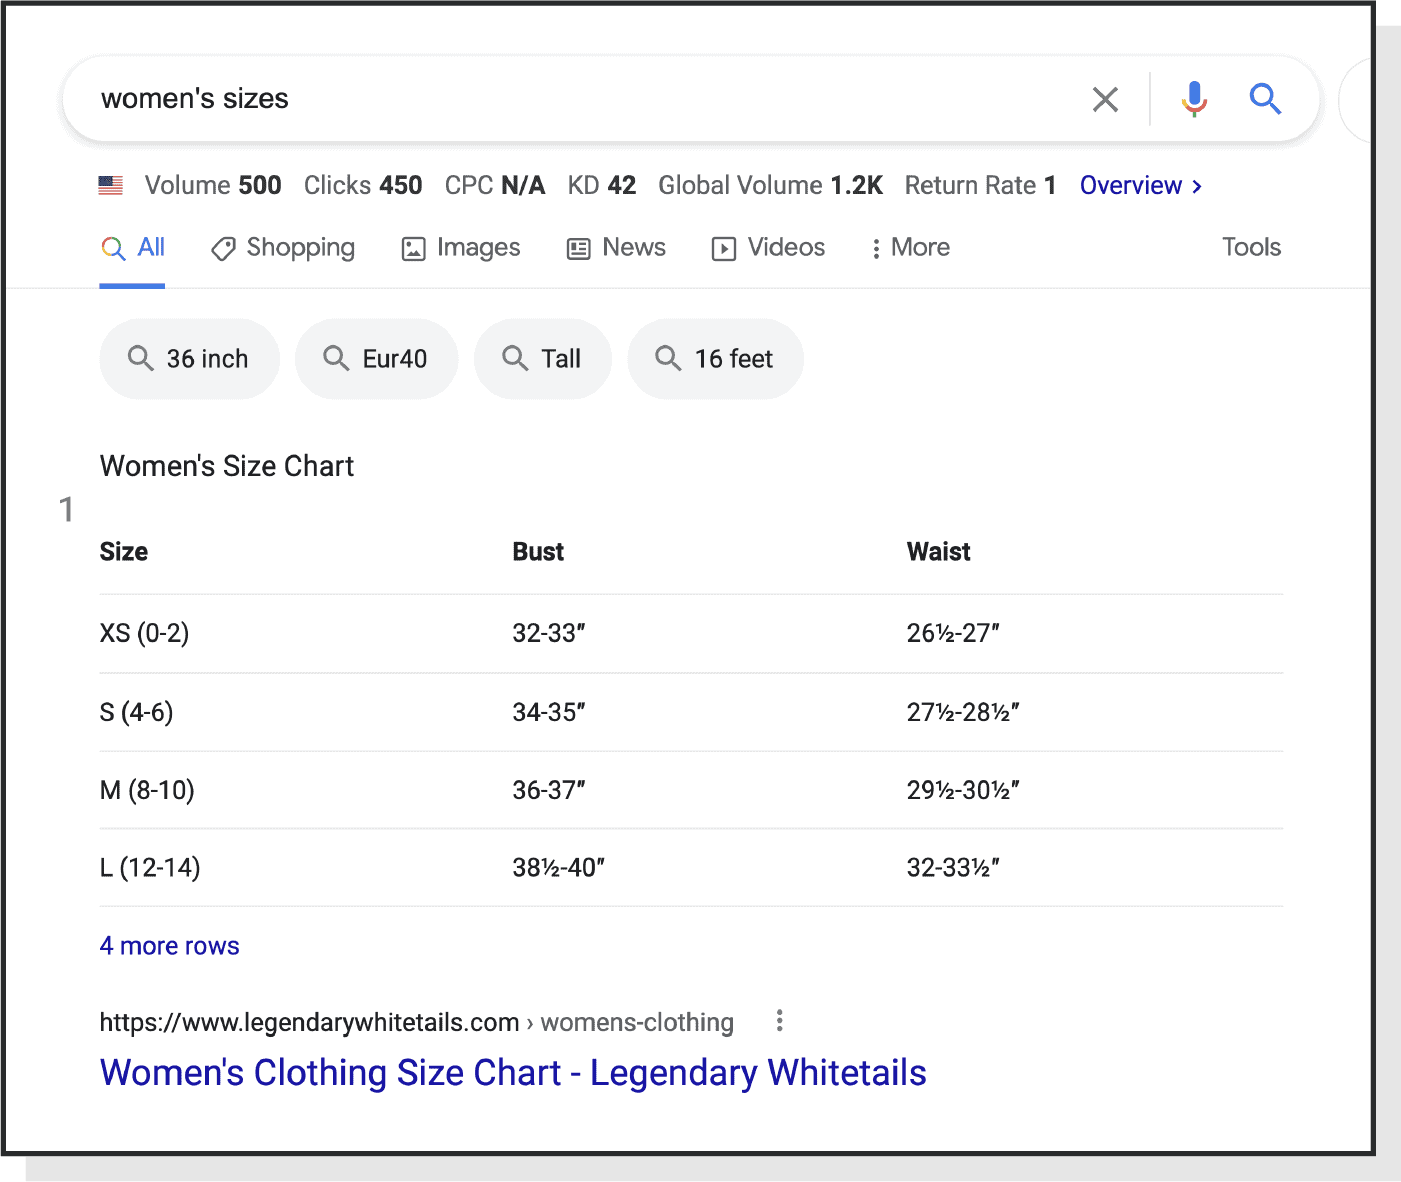 crawlable charts help increase the chance of rich snippets.